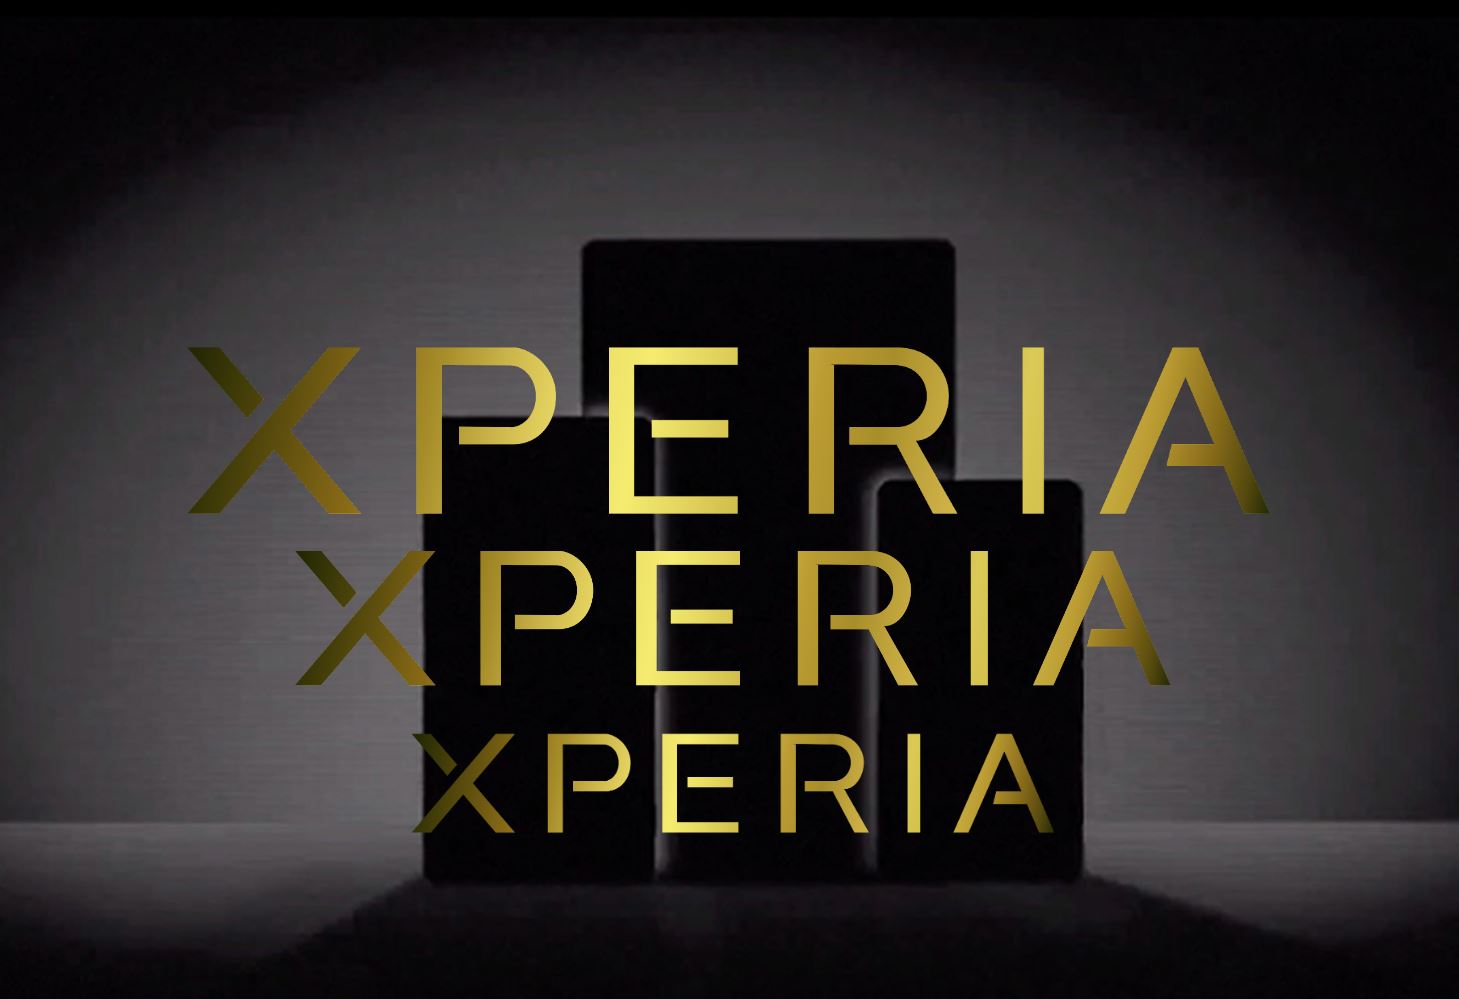 Next-generation Xperia lineup returns to XZ era 3 flagship models ‘Large, Medium and Small’ rumored to be published |  smartphone summary